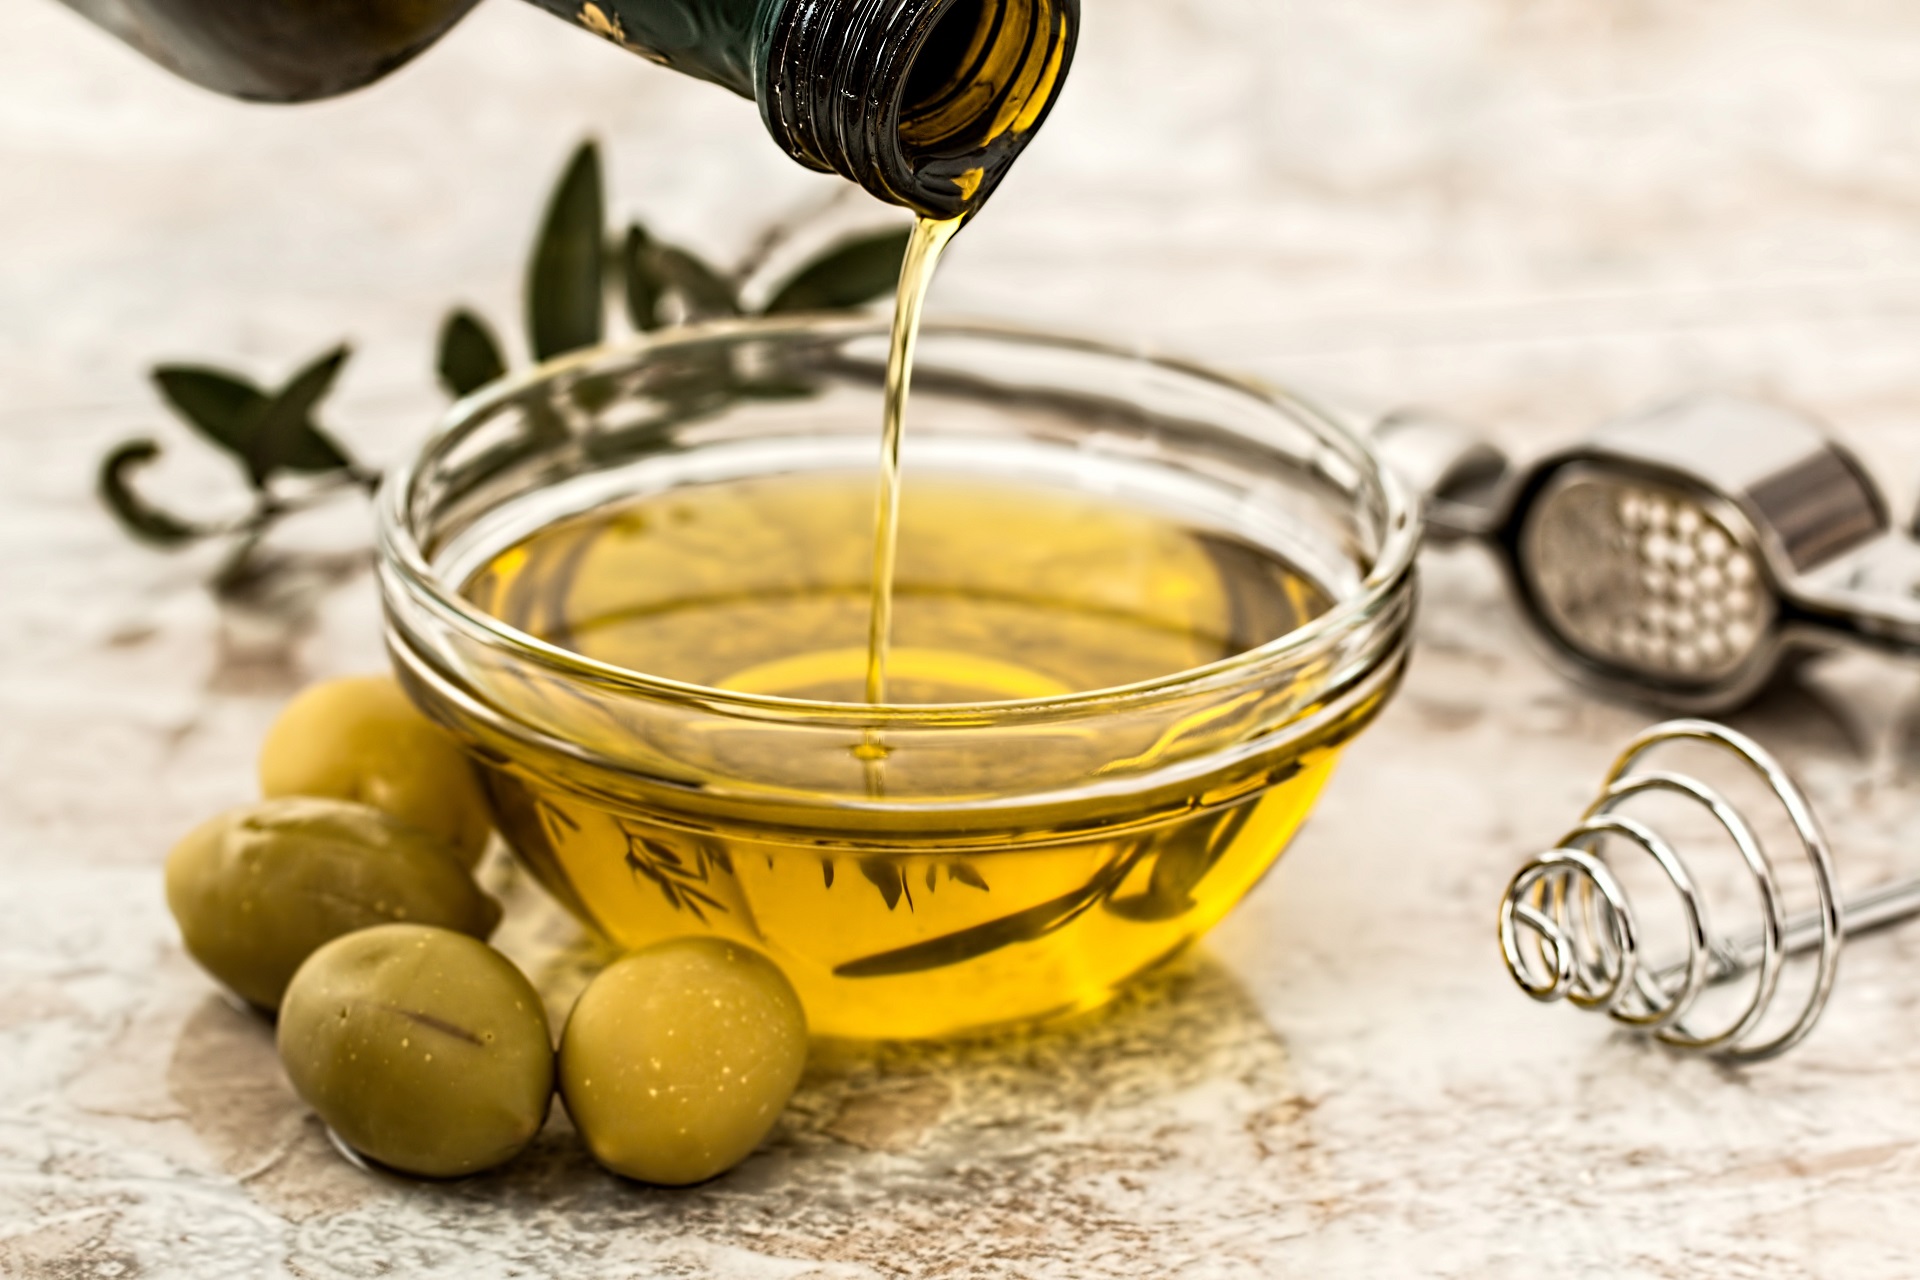 Olive oil as dressing for salads.